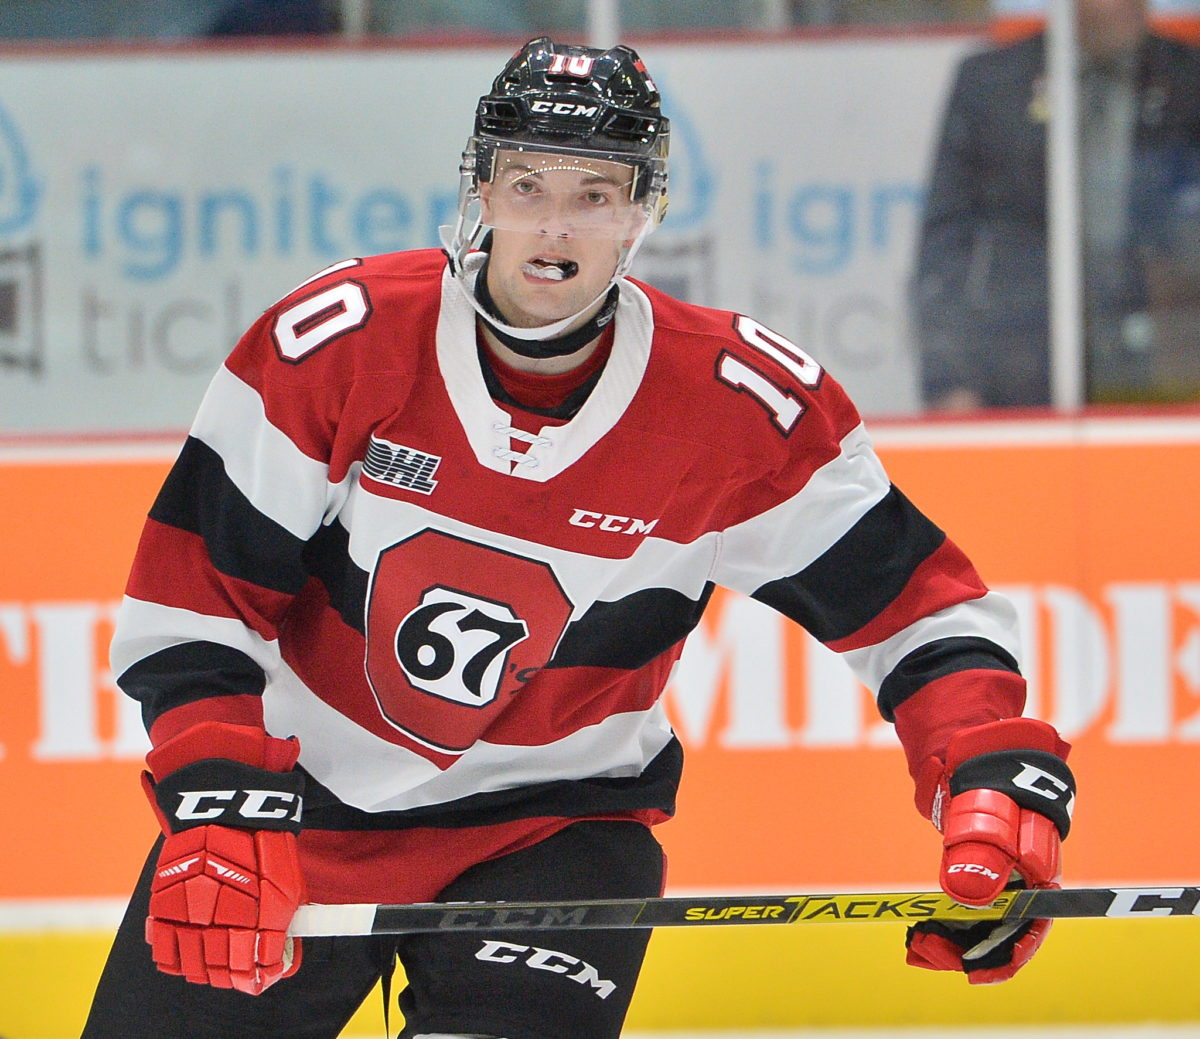 Cameron Tolnai Ottawa 67's-Ottawa 67's Welcome Christmas Break After Loss to Barrie Colts